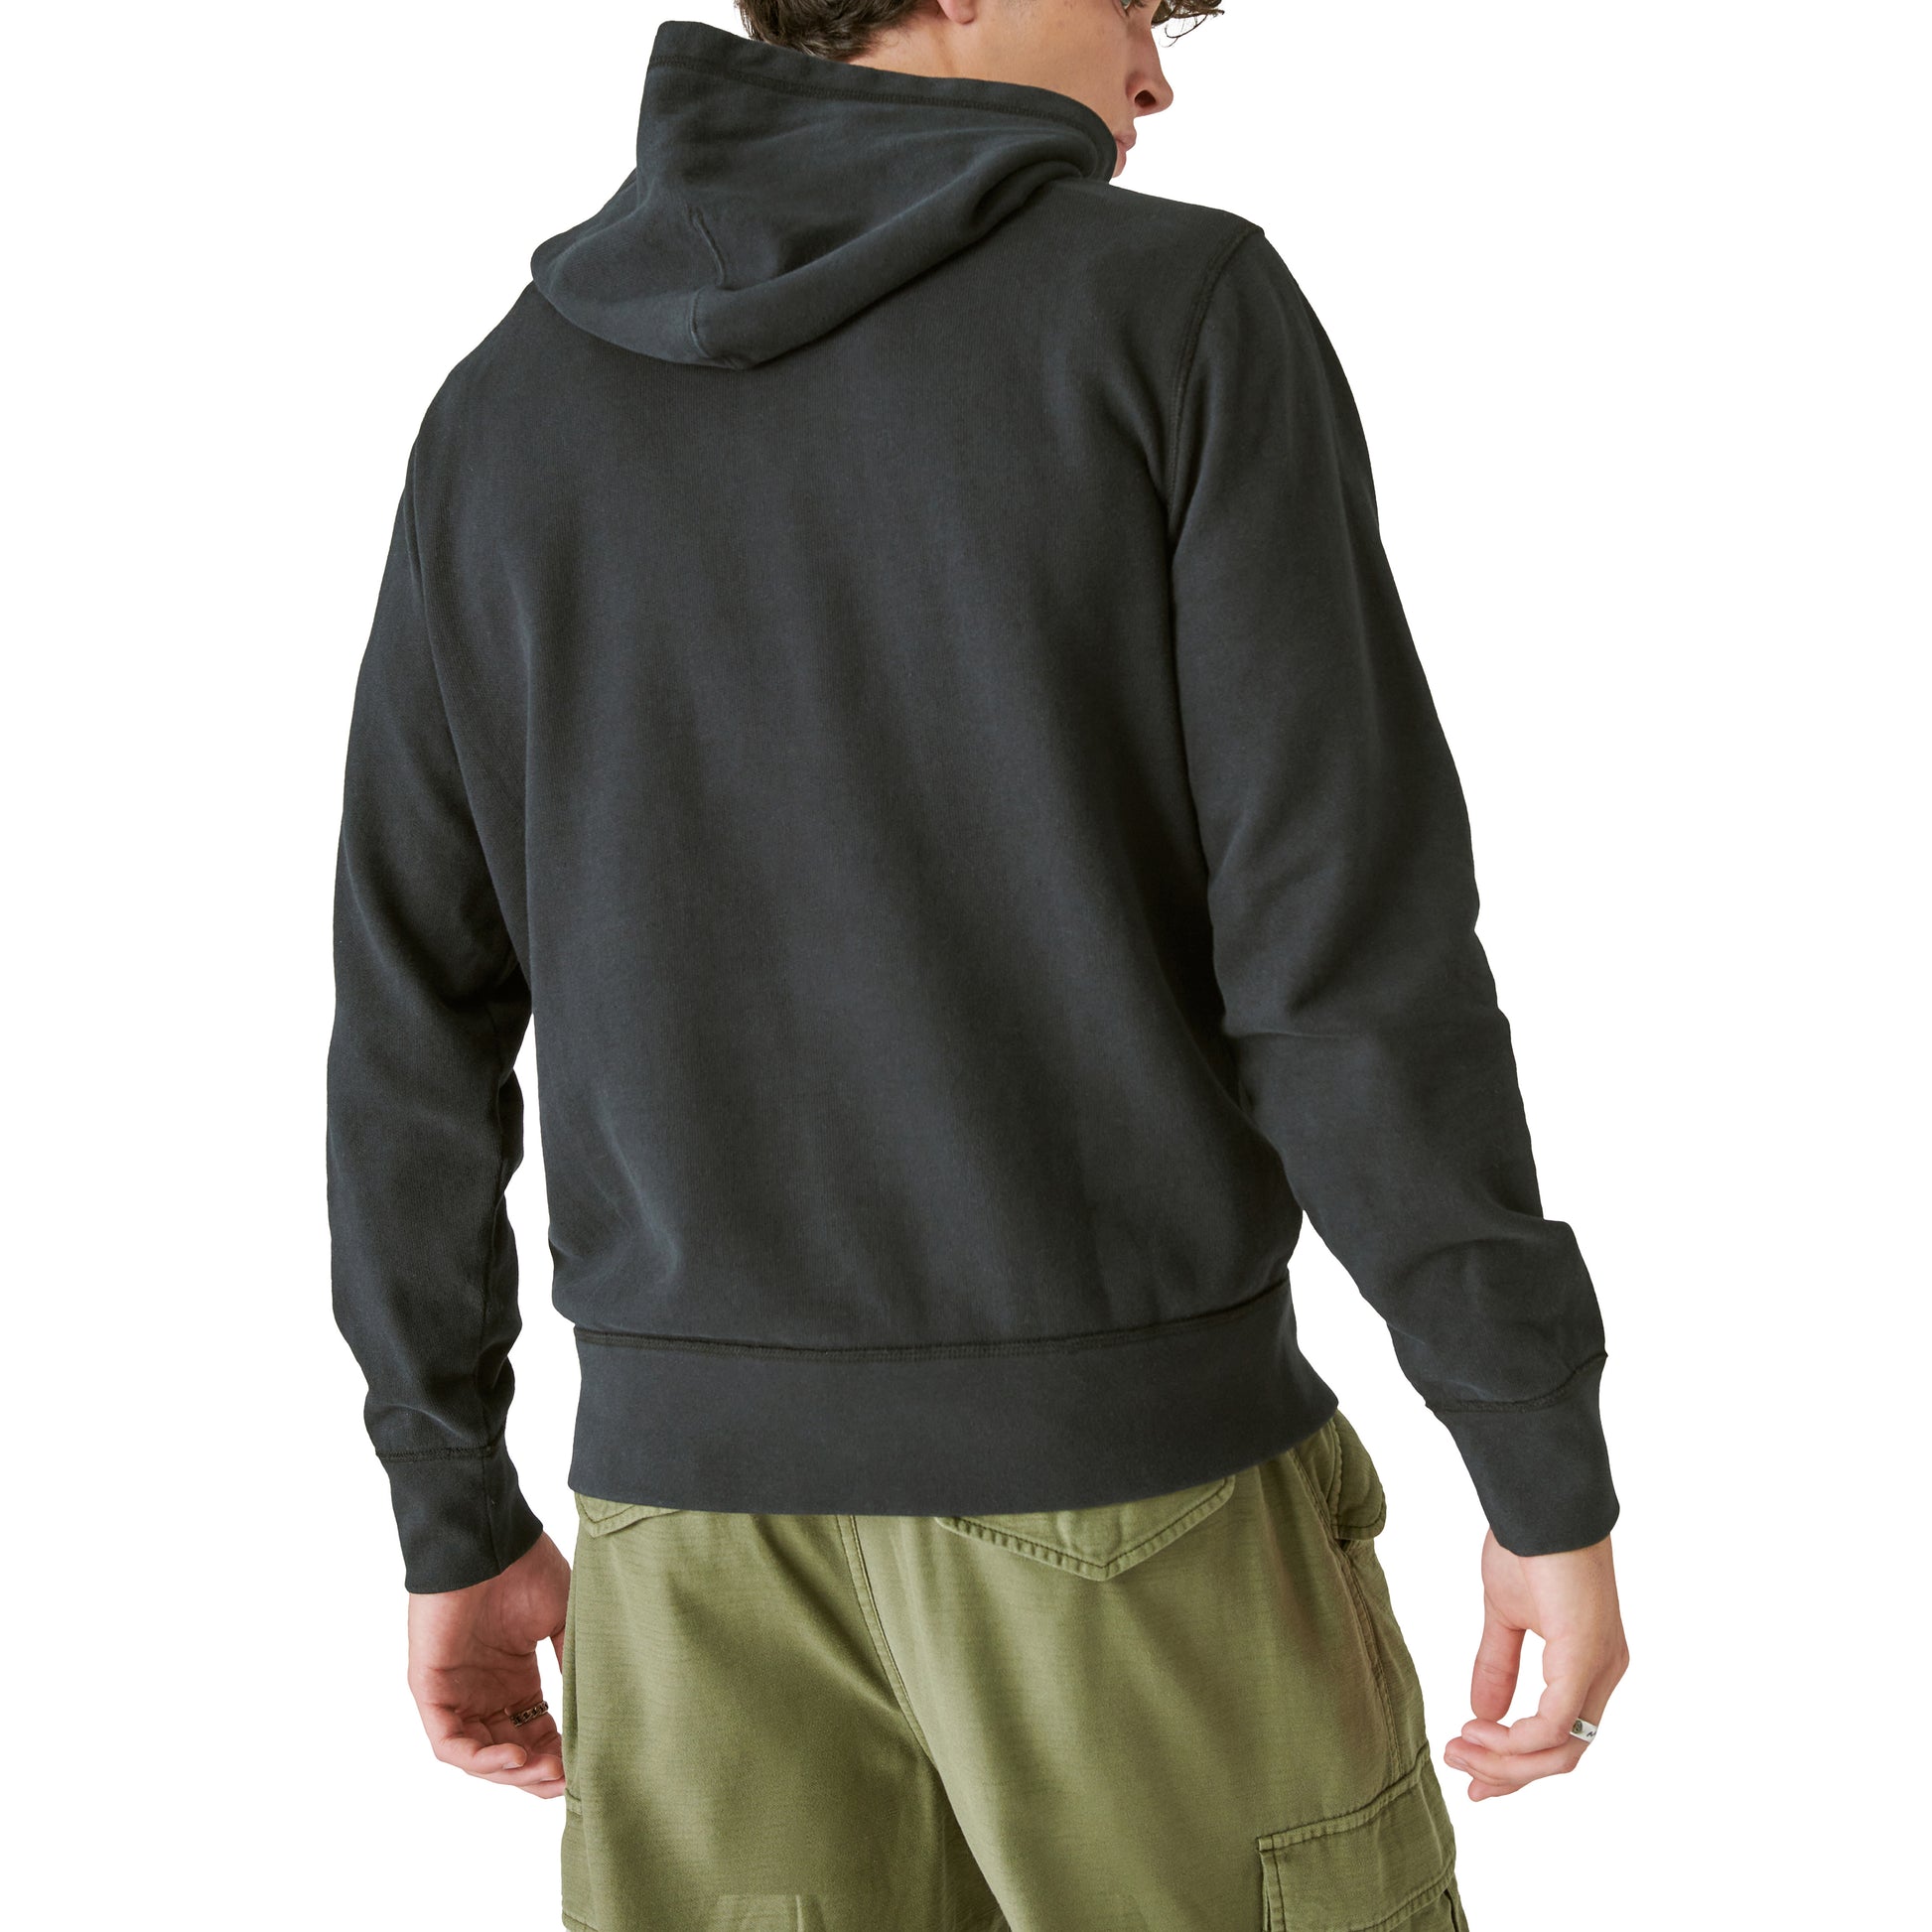 The limited edition Guinness Logo Hoodie showcases the back view of a man sporting a versatile black Lucky Brand hoodie available on the Guinness Webstore US.